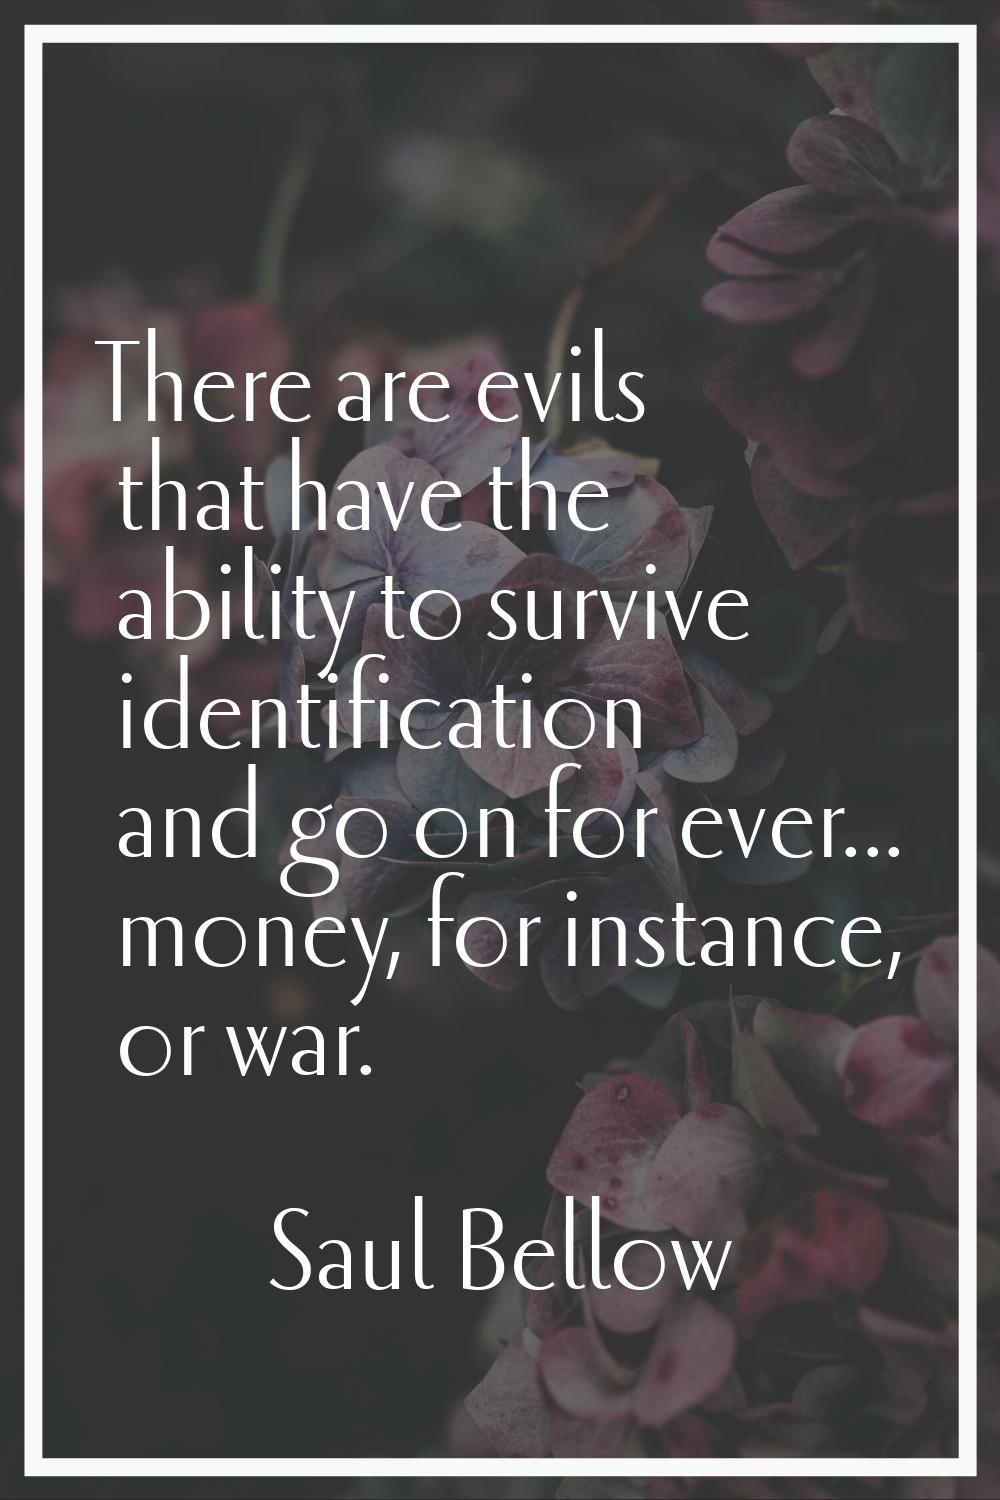 There are evils that have the ability to survive identification and go on for ever... money, for in